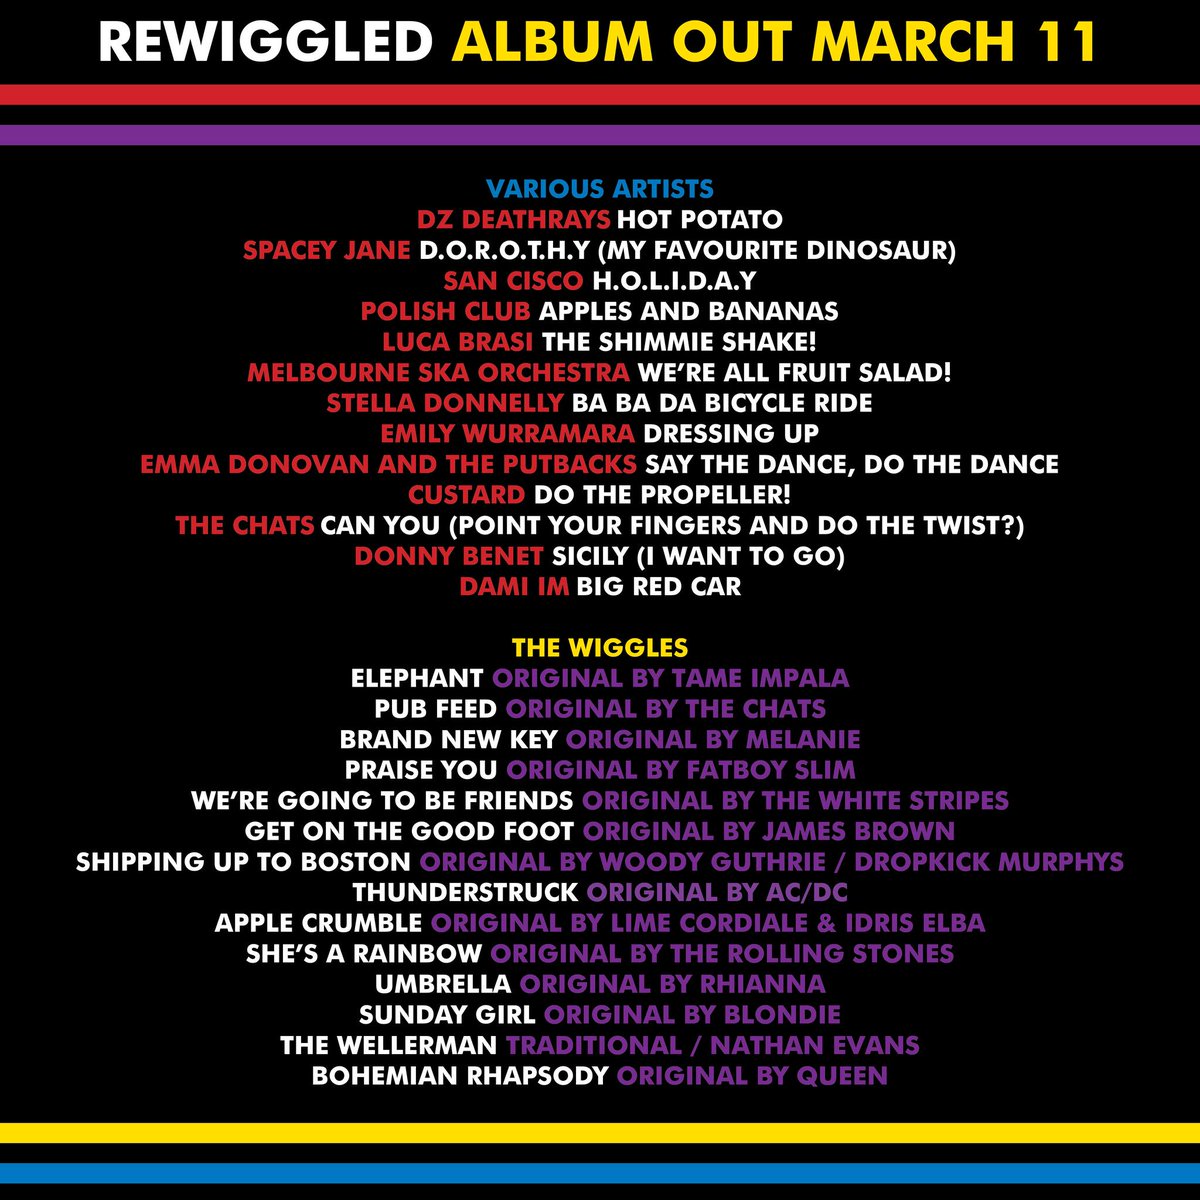 We are so excited to be asked to play on the new album from The Wiggles - 'Rewiggled'. Joining all these amazing acts covering some bloody fune Wiggles songs! Pre-order 'Rewiggled' now to make sure you don't get left behind 😎🎷🥳 Link 👉 snd.click/ReWiggled